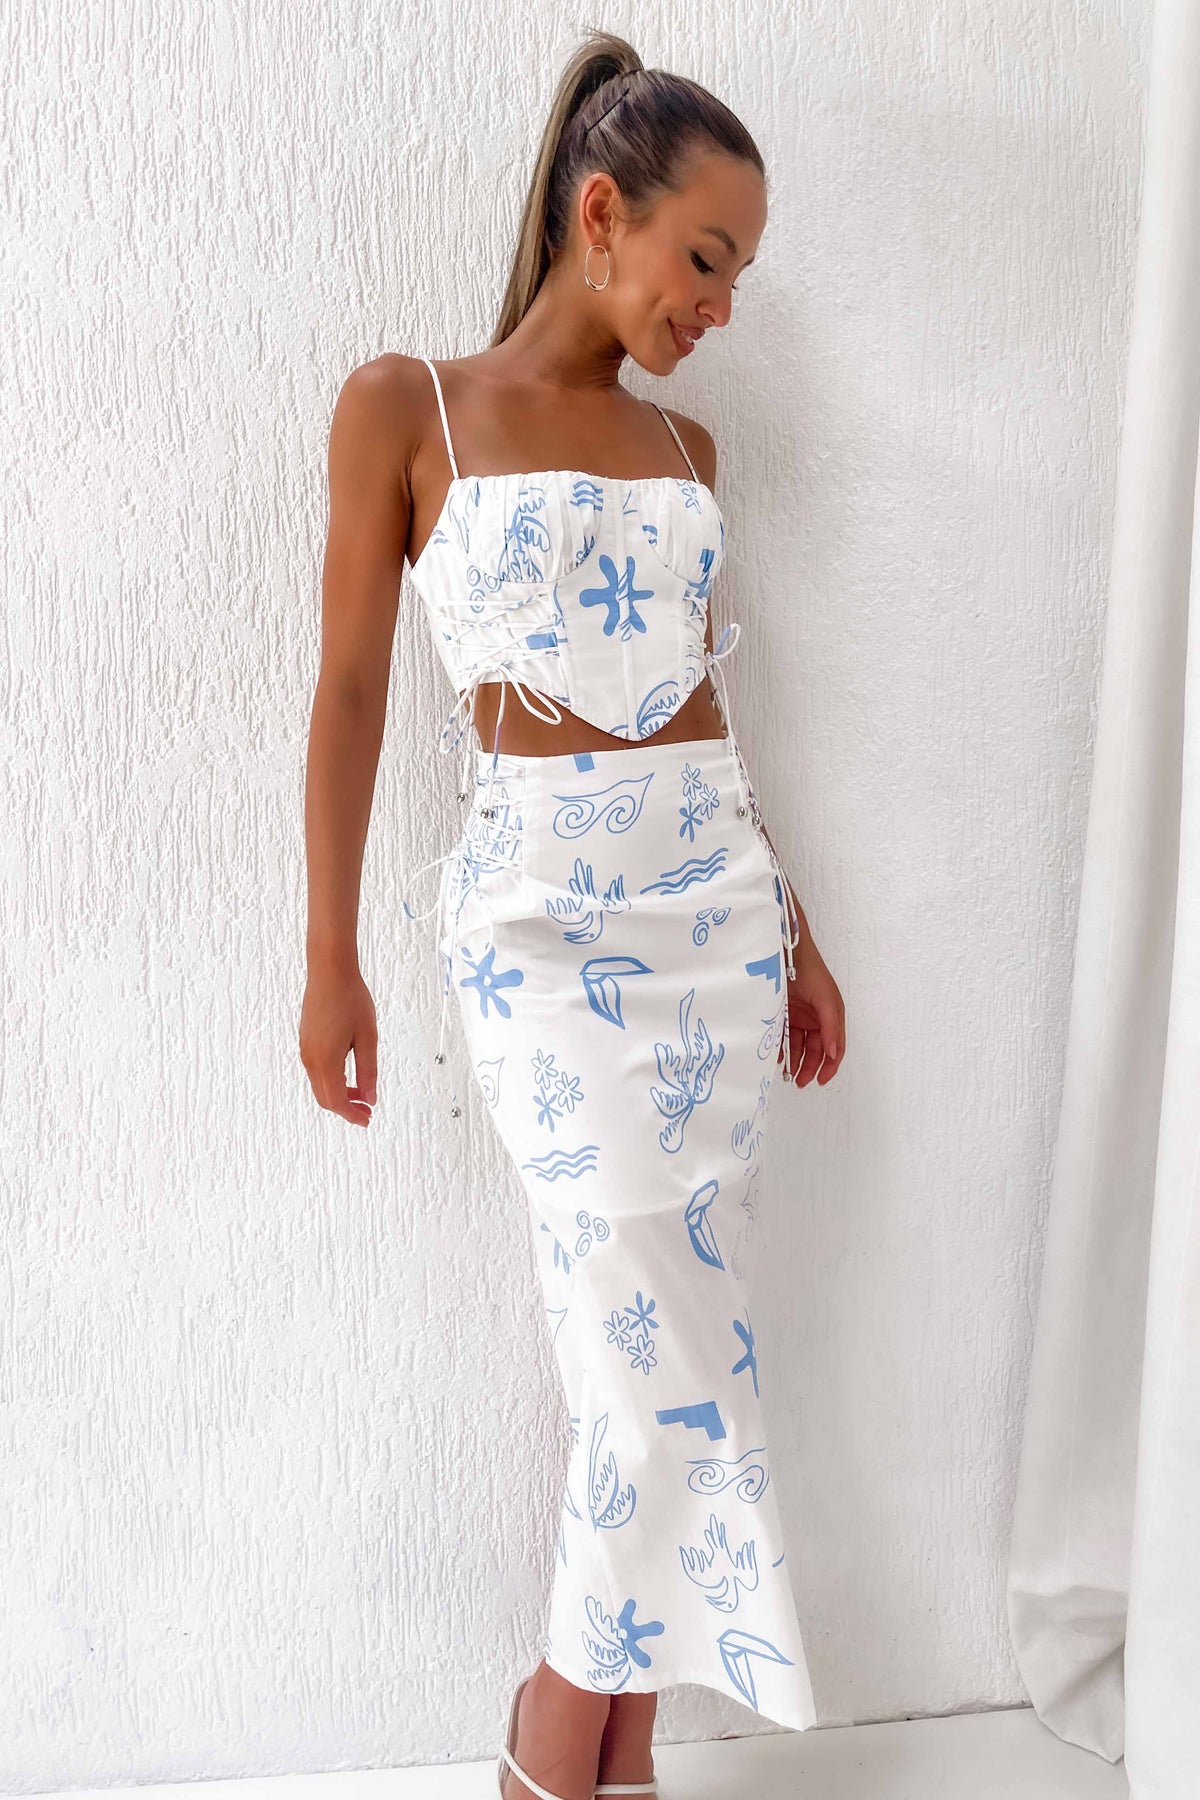 Constant Love Skirt, BLUE, BOTTOMS, COTTON &amp; POLYESTER, COTTON AND POLYESTER, HIGH WAISTED, MIDI SKIRT, new arrivals, POLYESTER AND COTTON, SKIRTS, , -MISHKAH